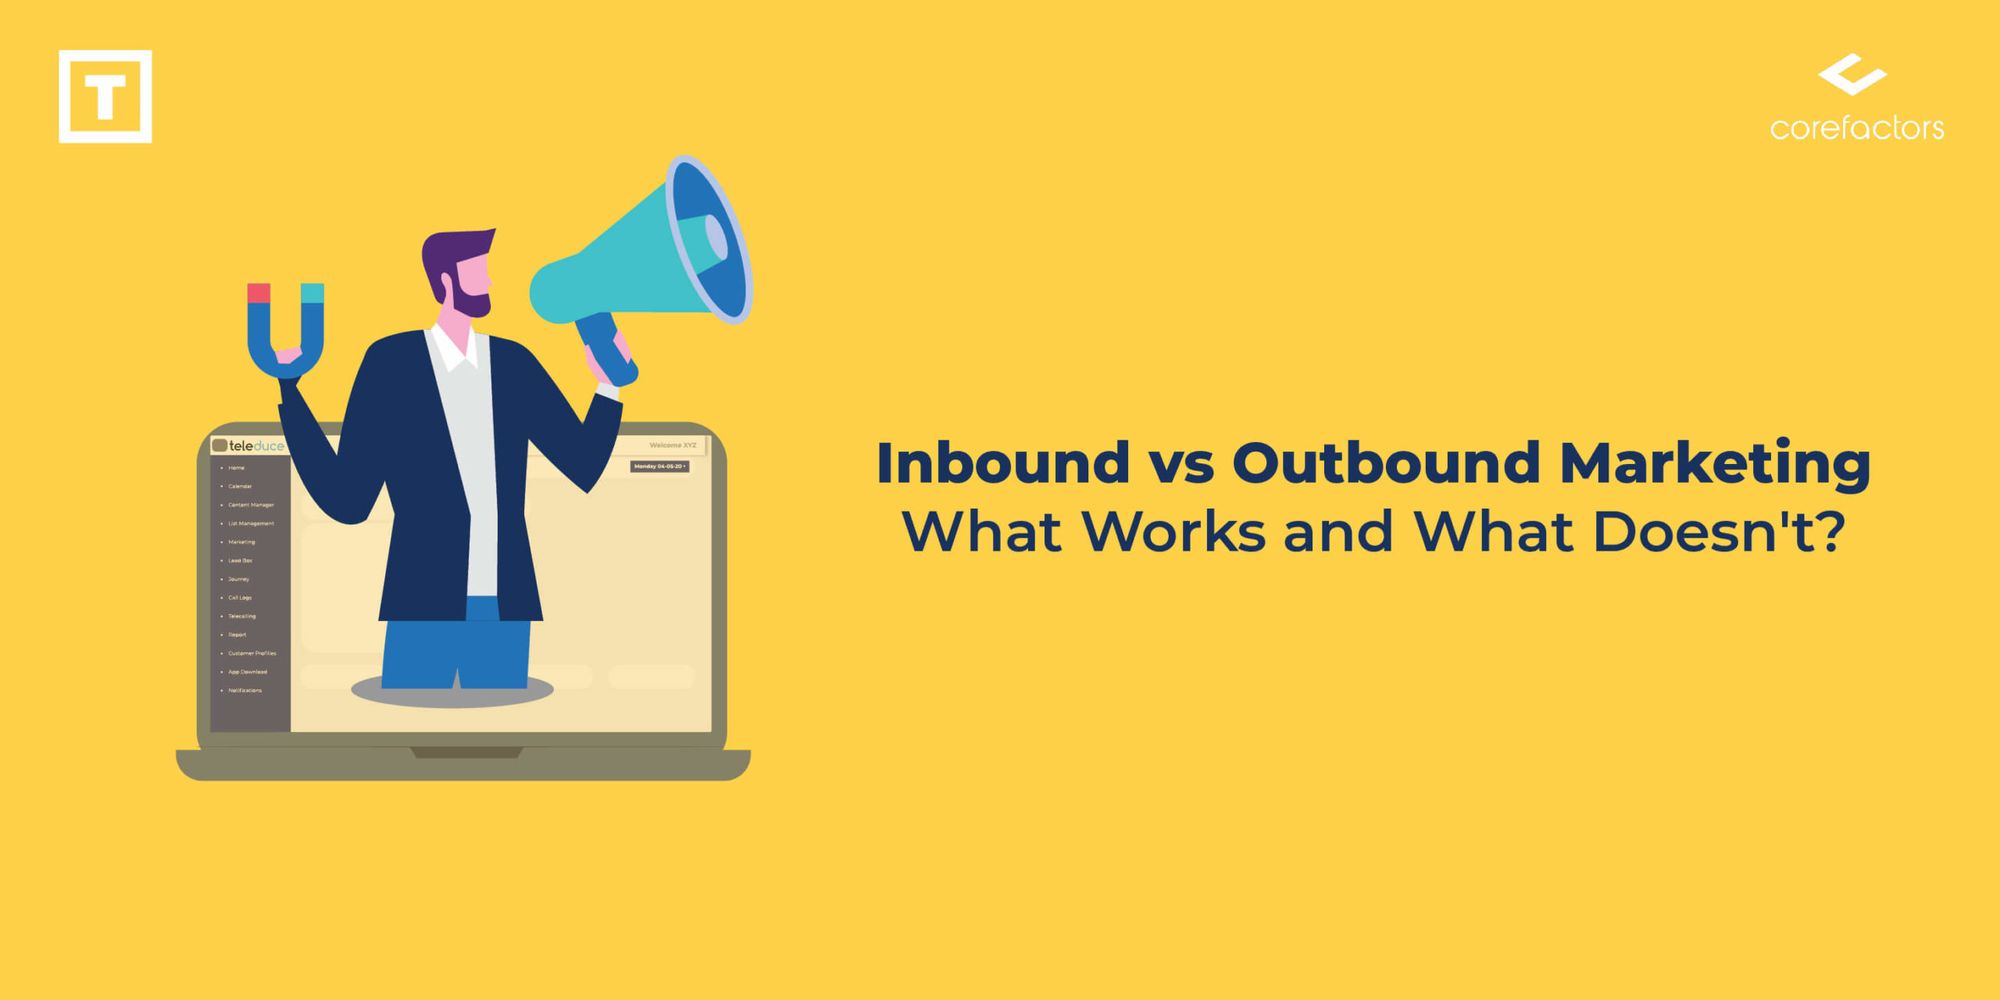 Inbound vs Outbound Marketing: What Works and What Doesn't?